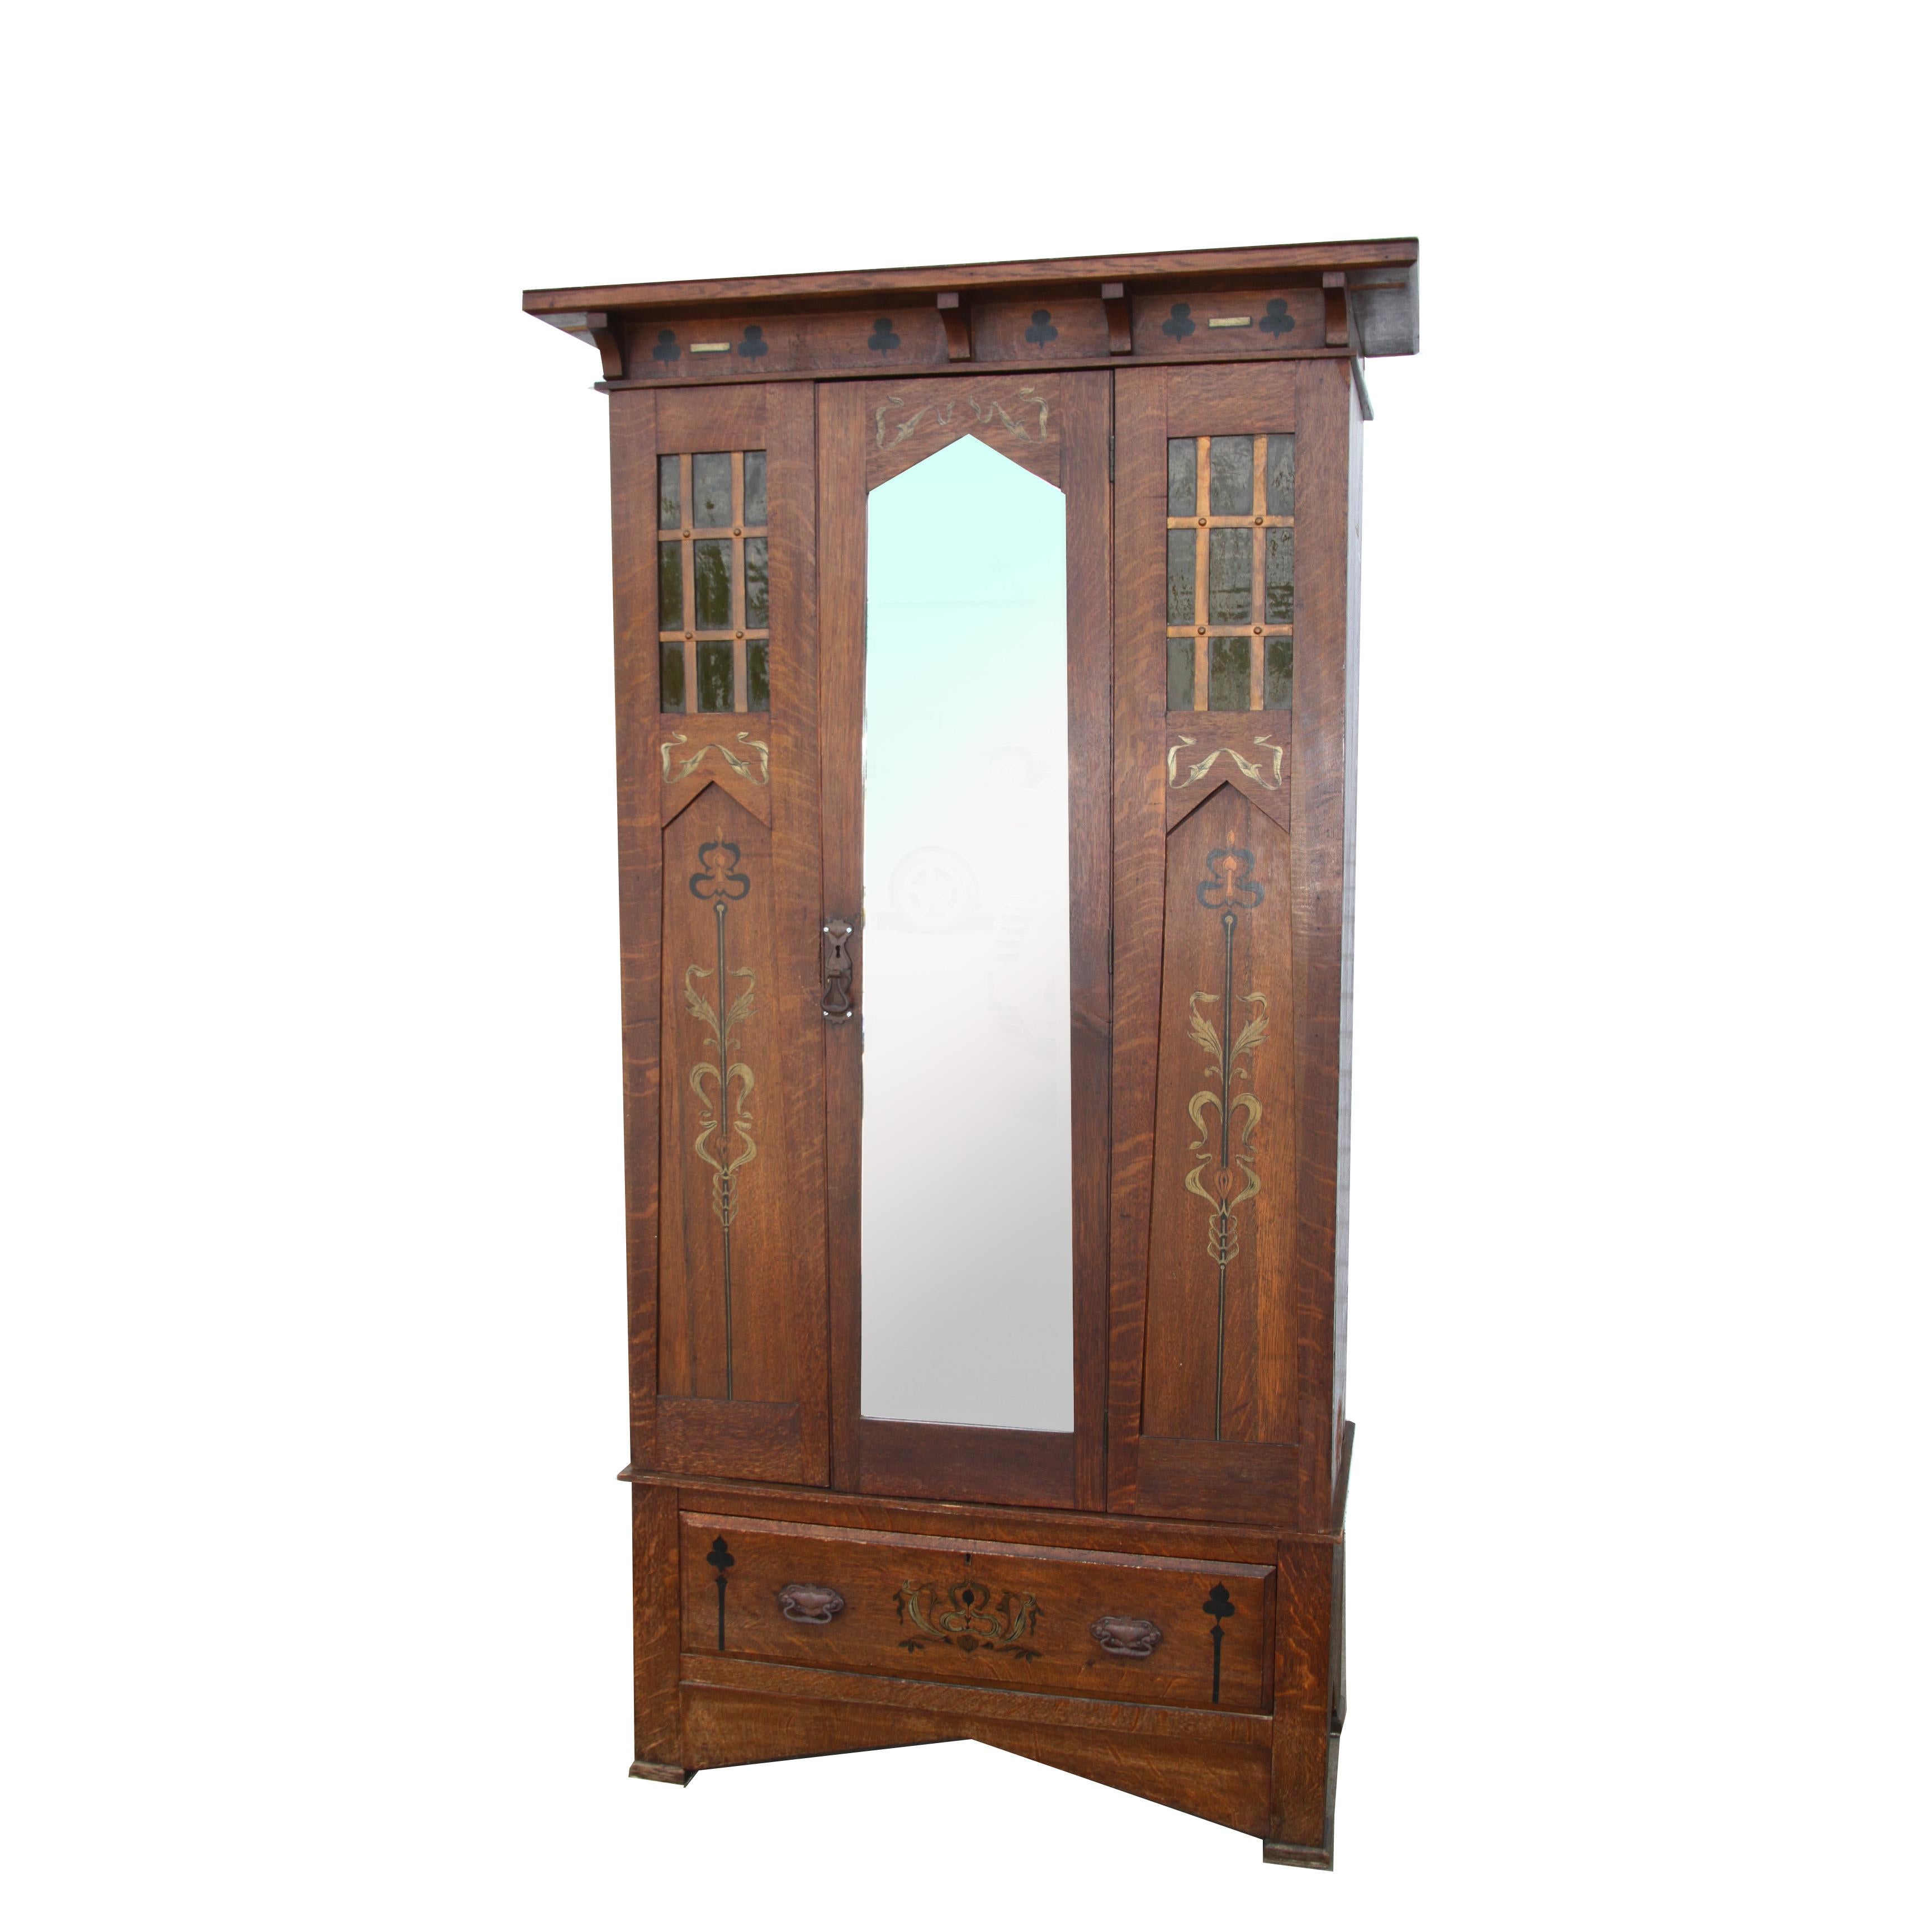 6FT Arts and Crafts Mission Oak Armoire

Arts and Crafts oak wardrobe with top cornice, decorative windows and a full-length original beveled mirror door. Opens to a full-length hanging space inside with a large deep drawer below. Floral inlays.